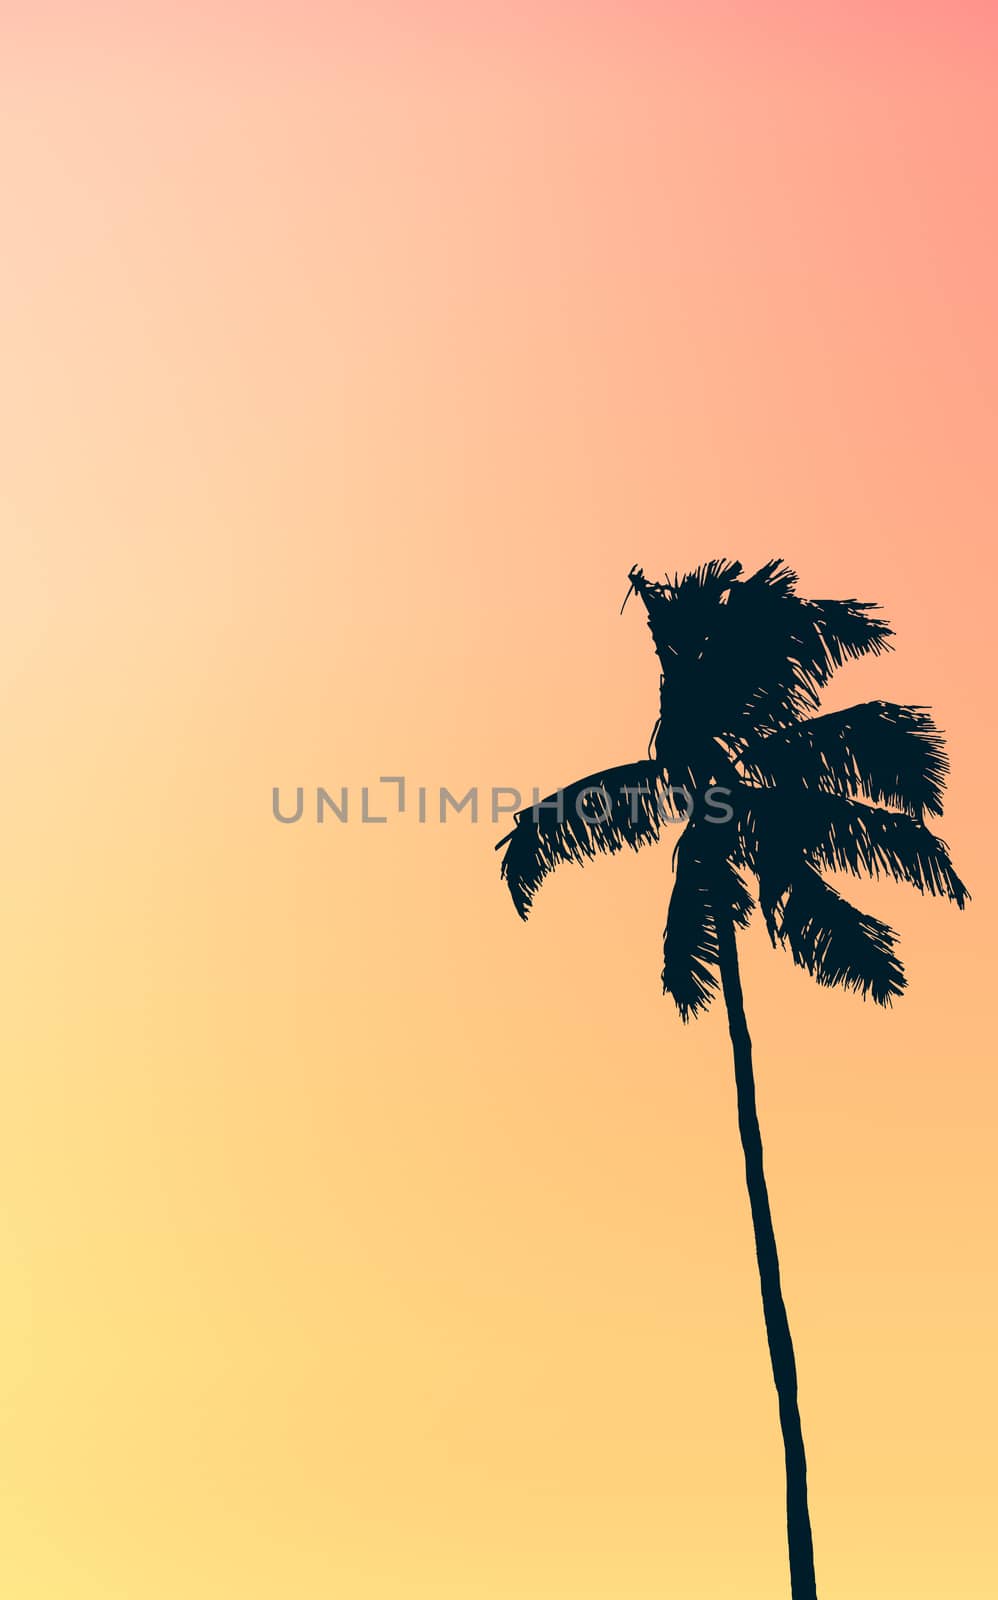 Illustration Of Retro Style Single Palm Tree Against Muted Pastel Colored Tropical Red And Orange Sunset